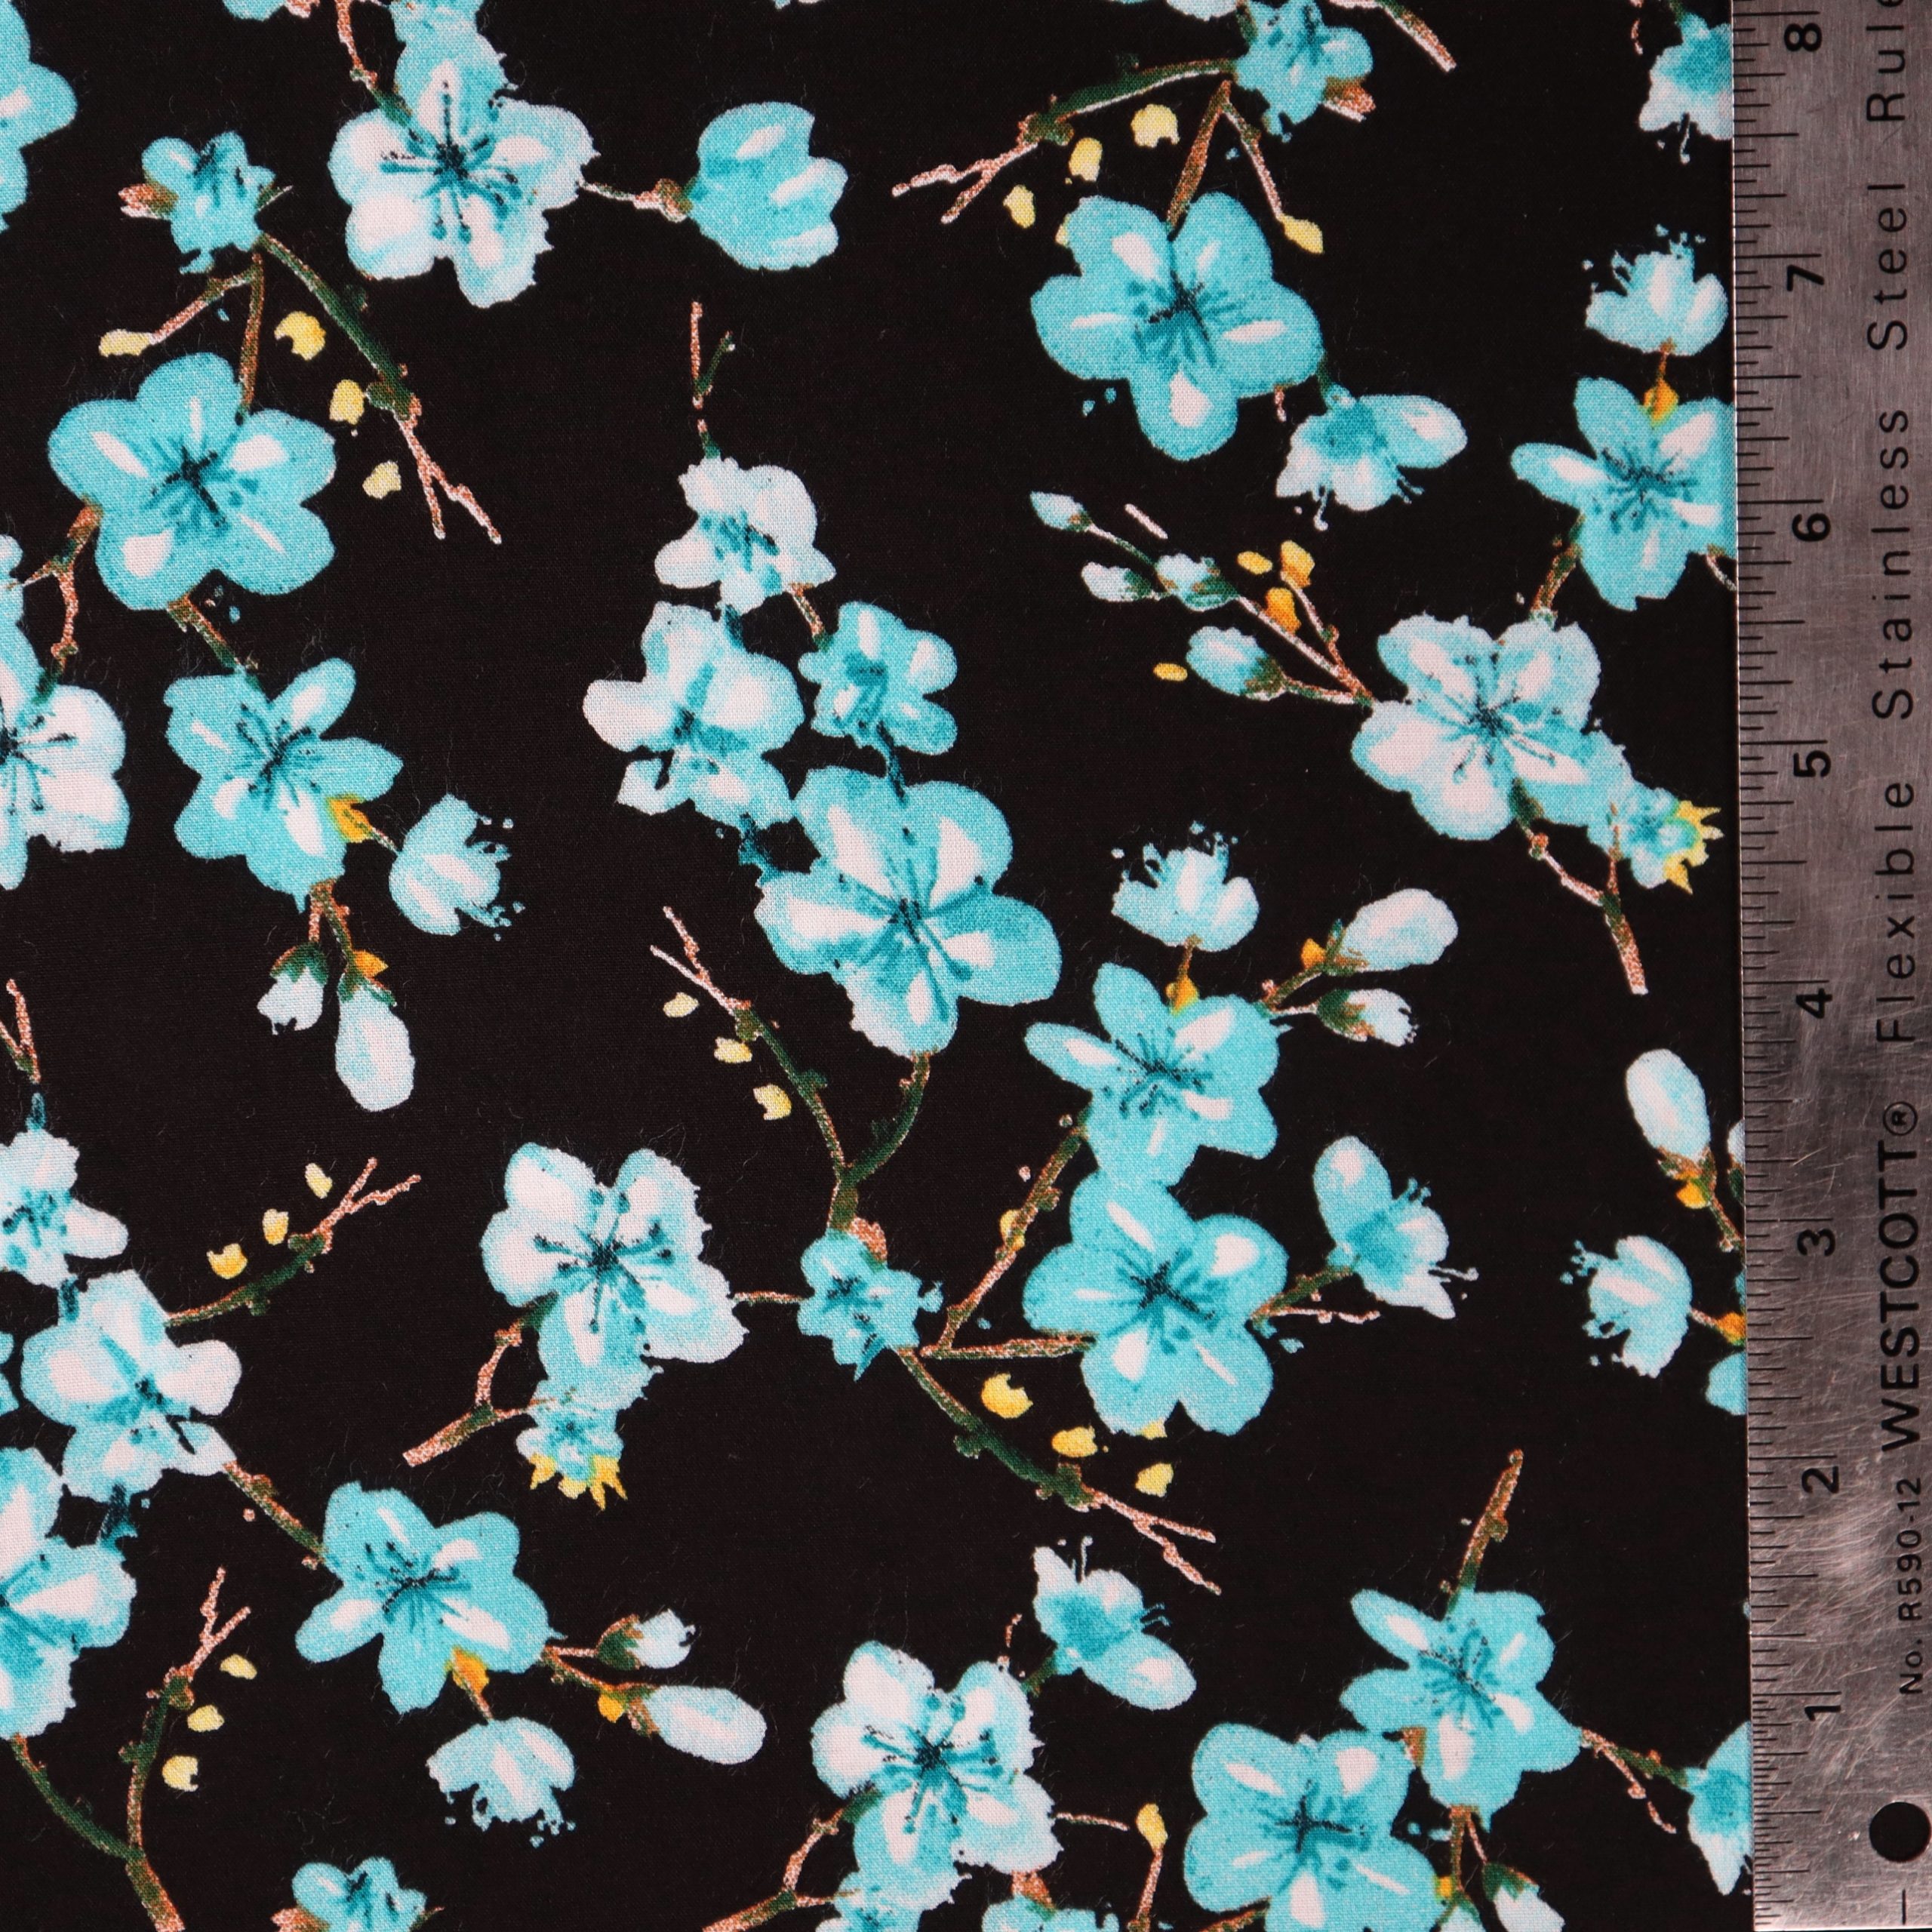 Floral a-4/ black/turquoise